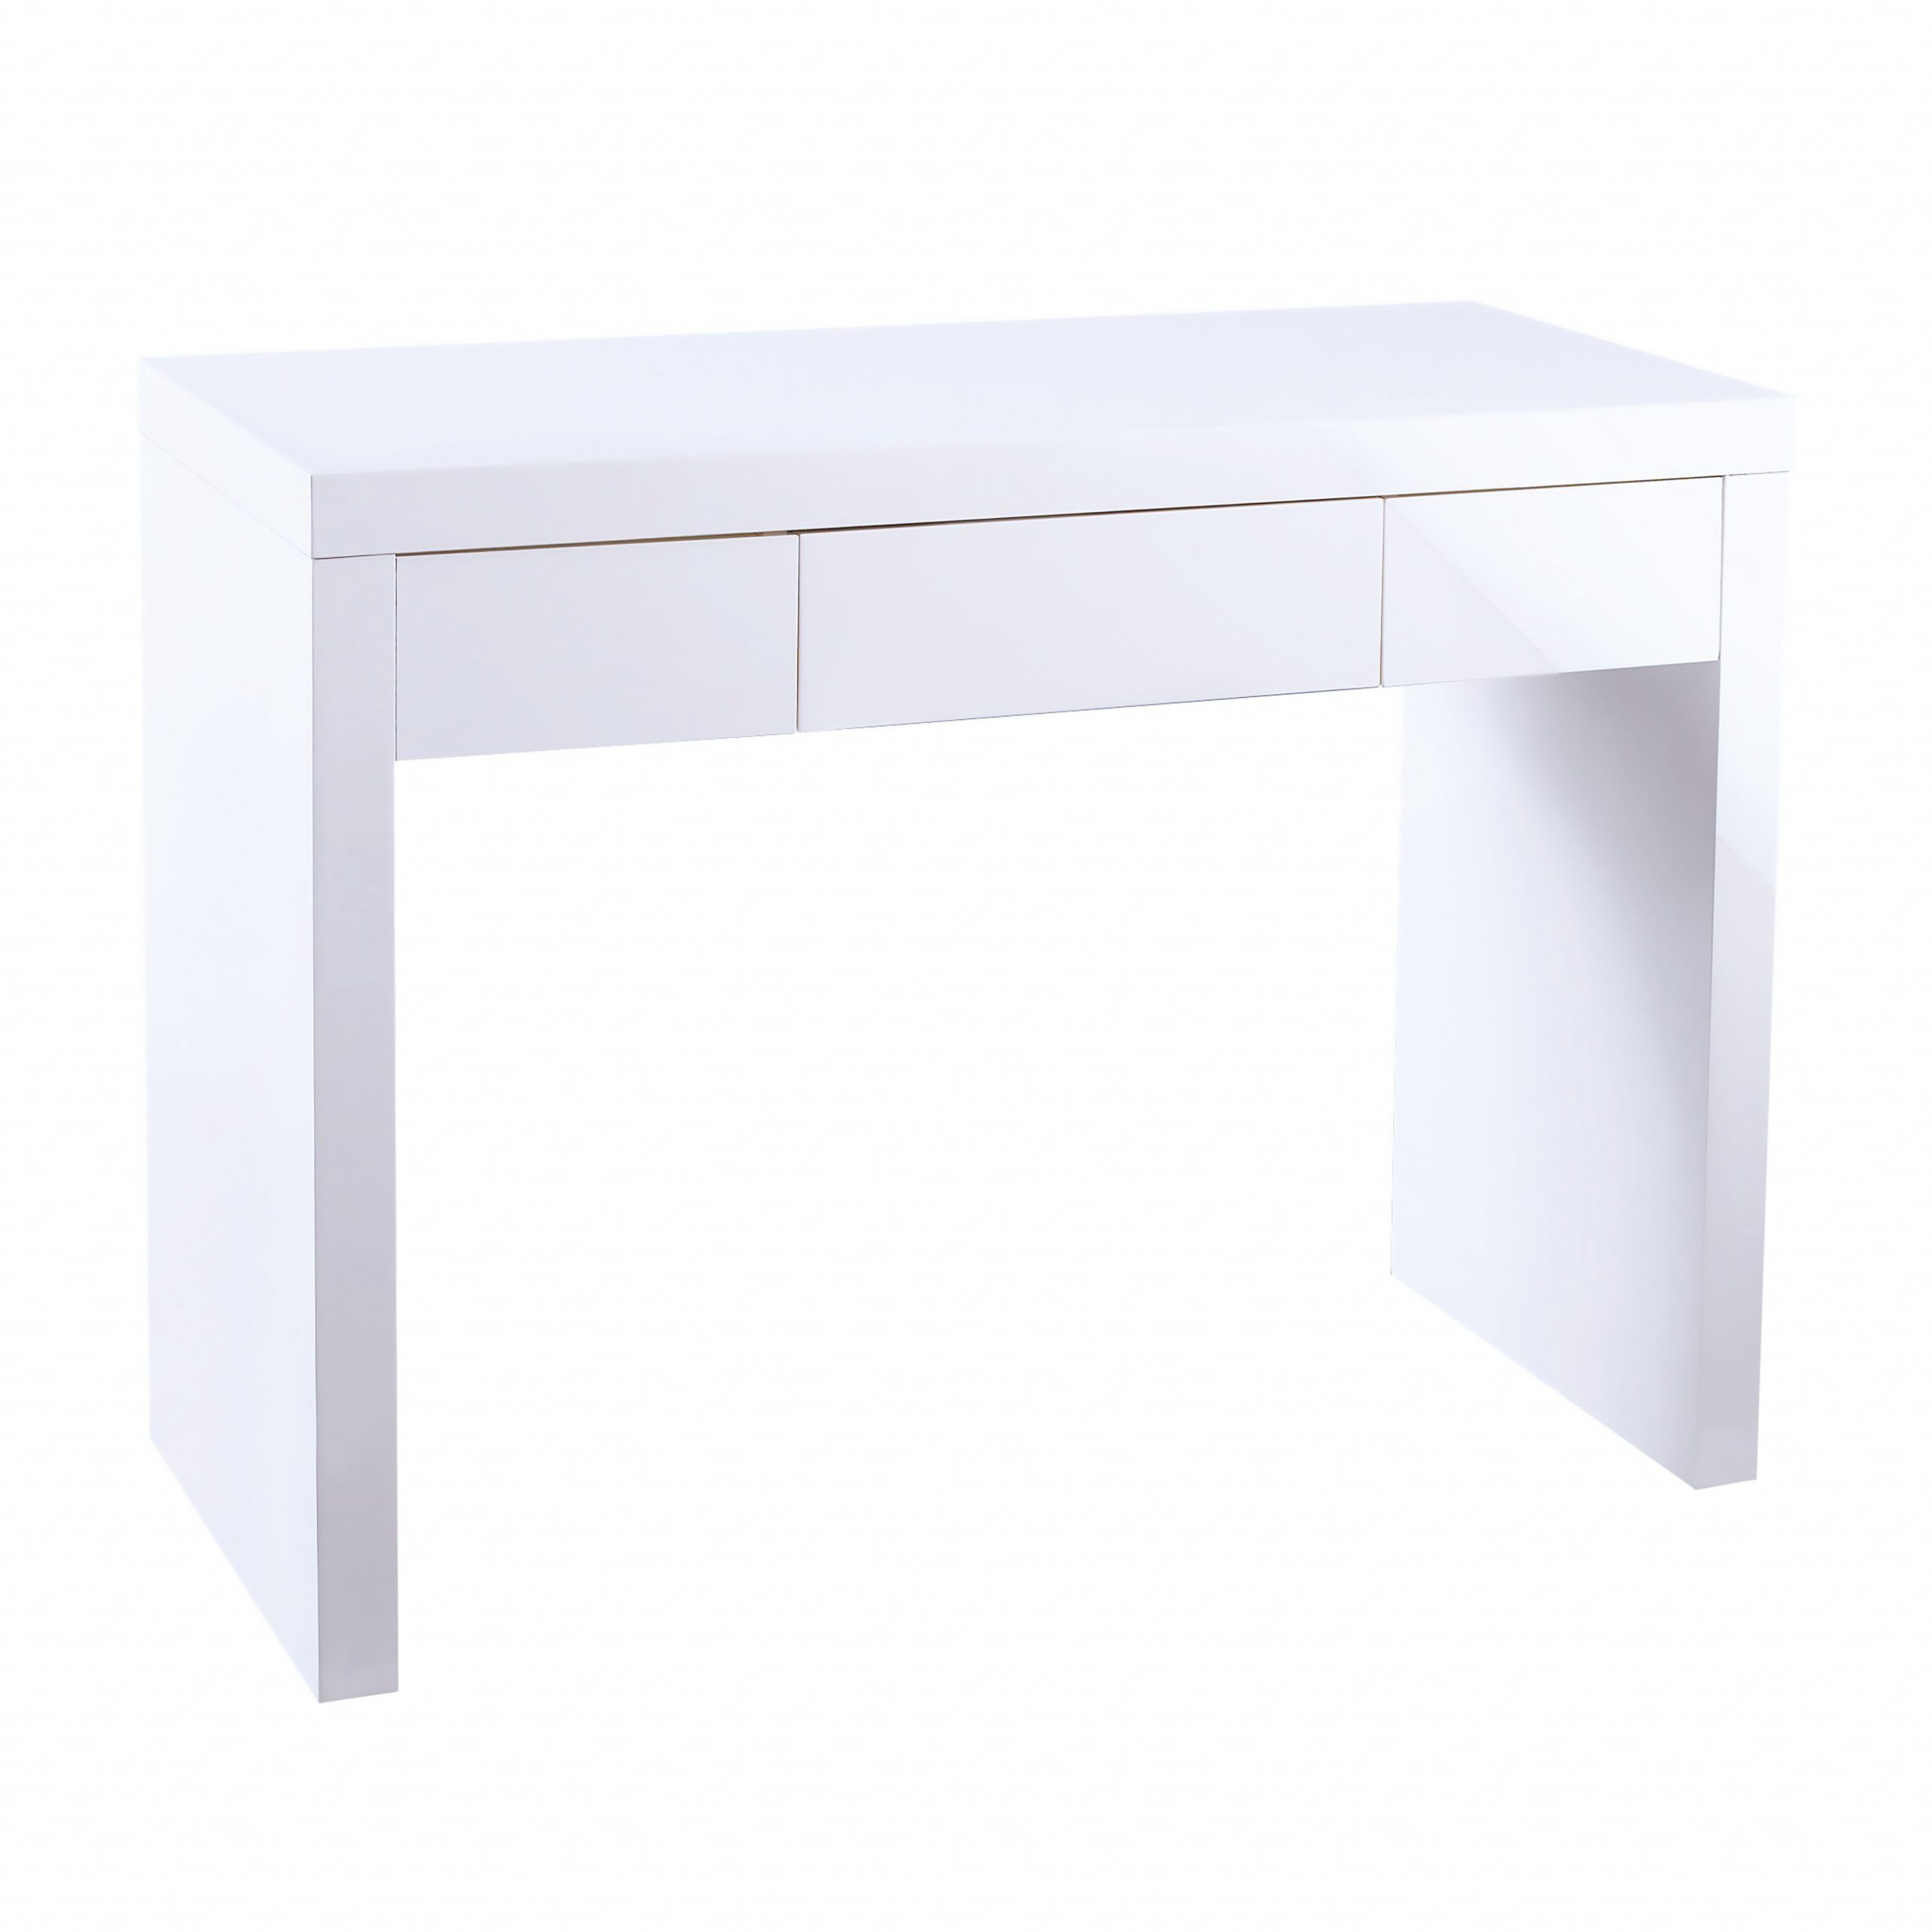 Puro Dressing Table White | Lpd Furniture With Puro White Tv Stands (View 1 of 15)